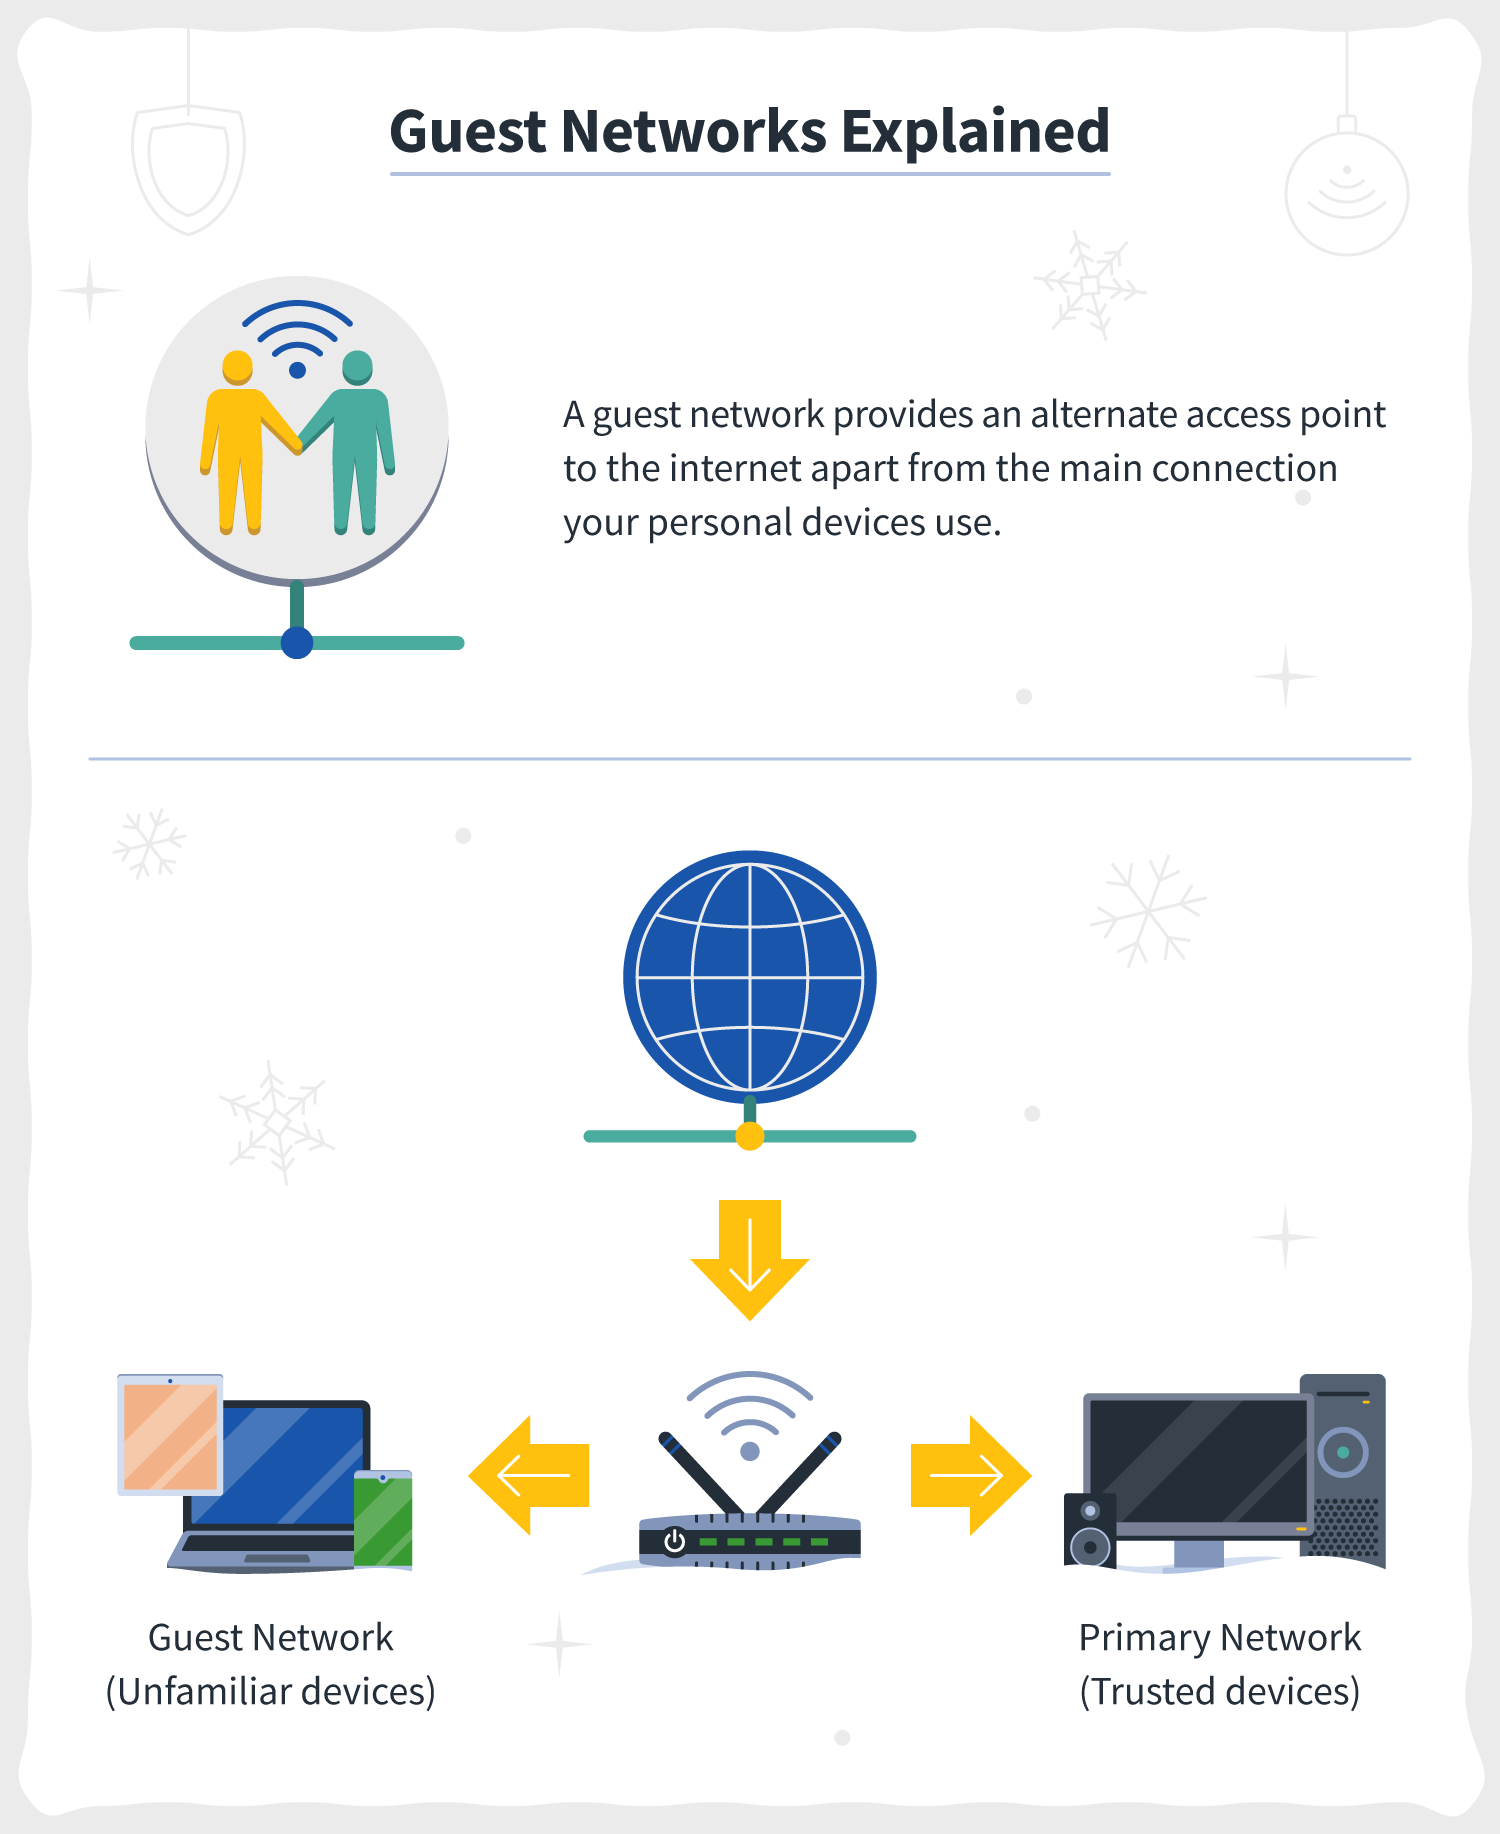 a guest network definition is followed by an illustration of how a guest network works